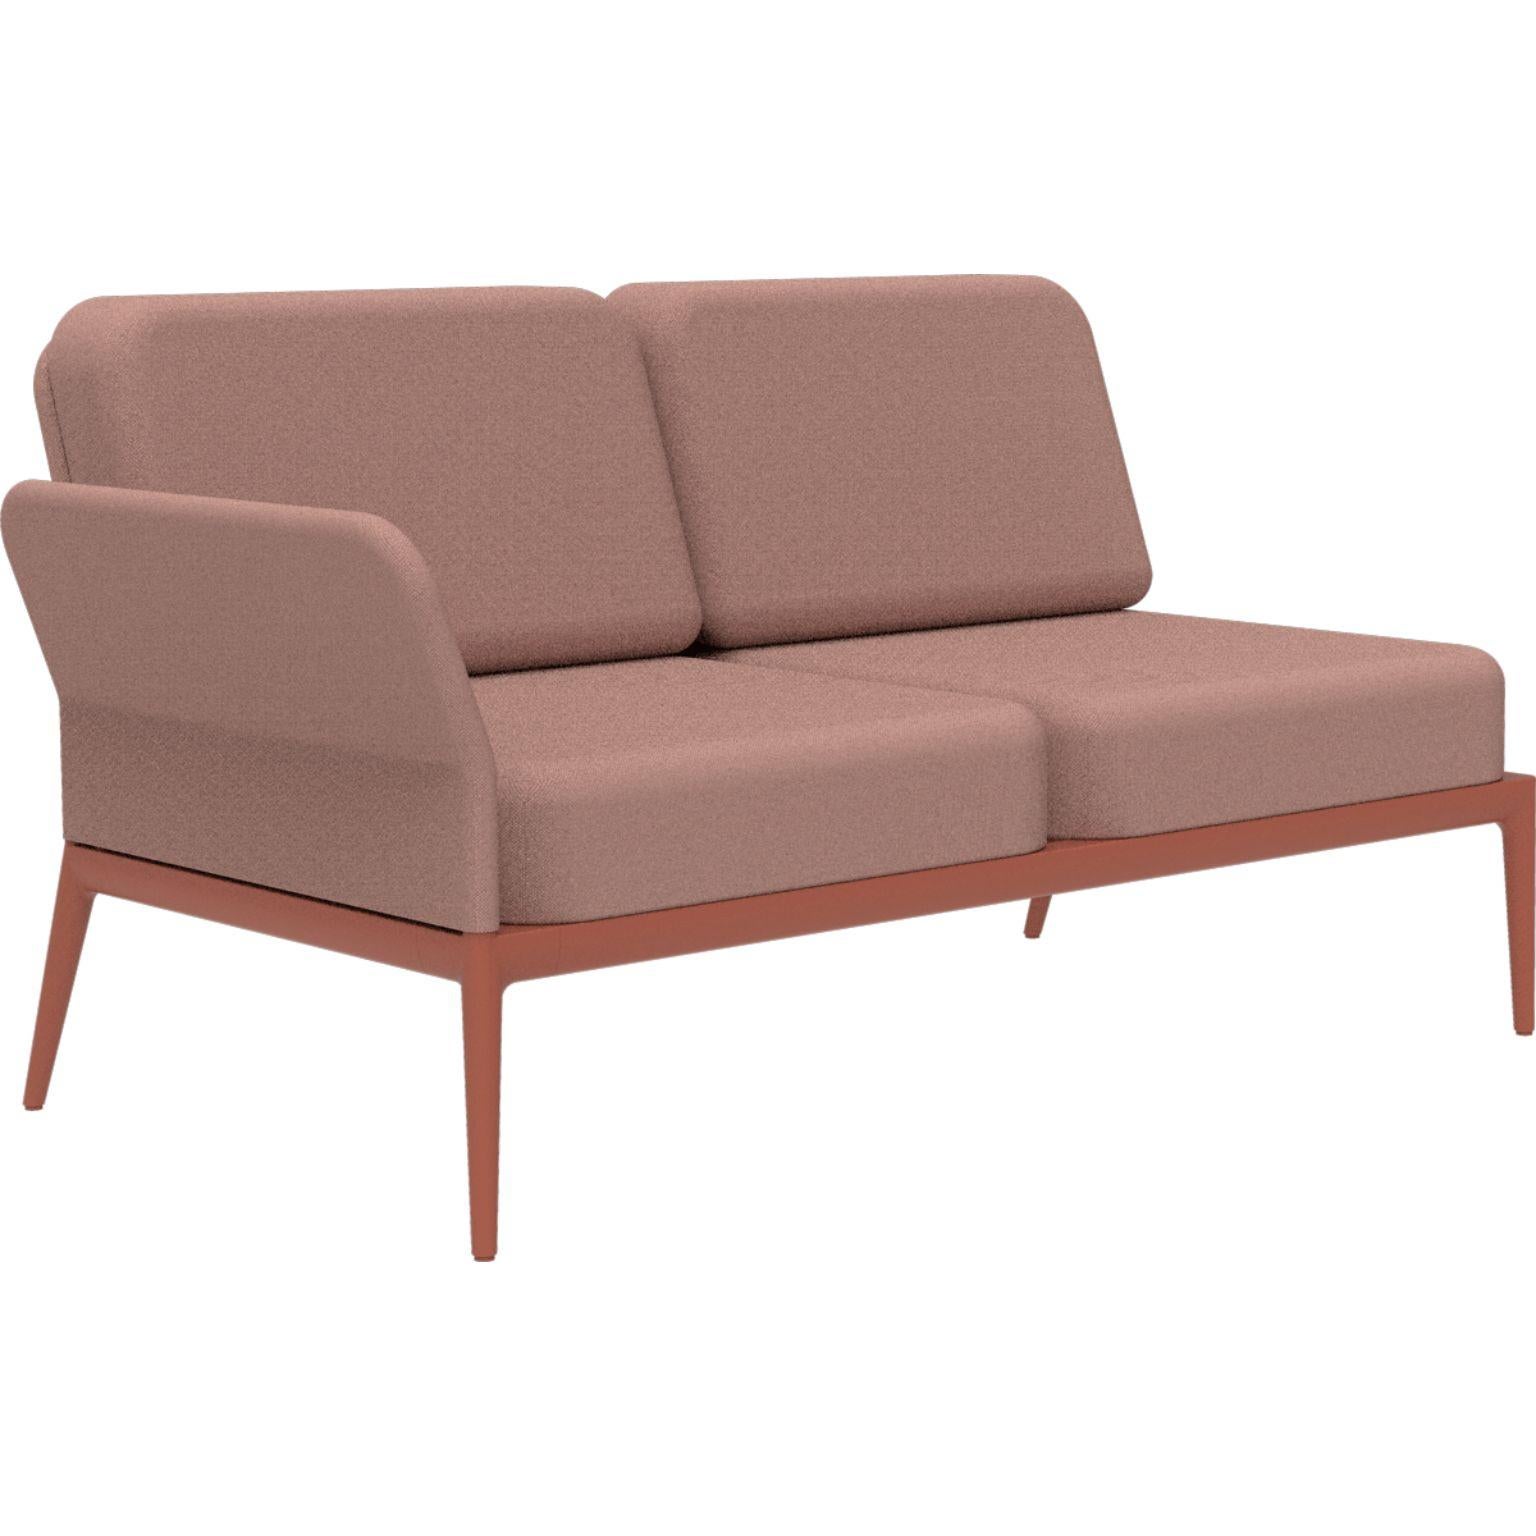 Cover Salmon Double Right Modular Sofa by MOWEE
Dimensions: D83 x W148 x H81 cm (seat height 42 cm).
Material: Aluminum and upholstery.
Weight: 29 kg.
Also available in different colors and finishes. 

An unmistakable collection for its beauty